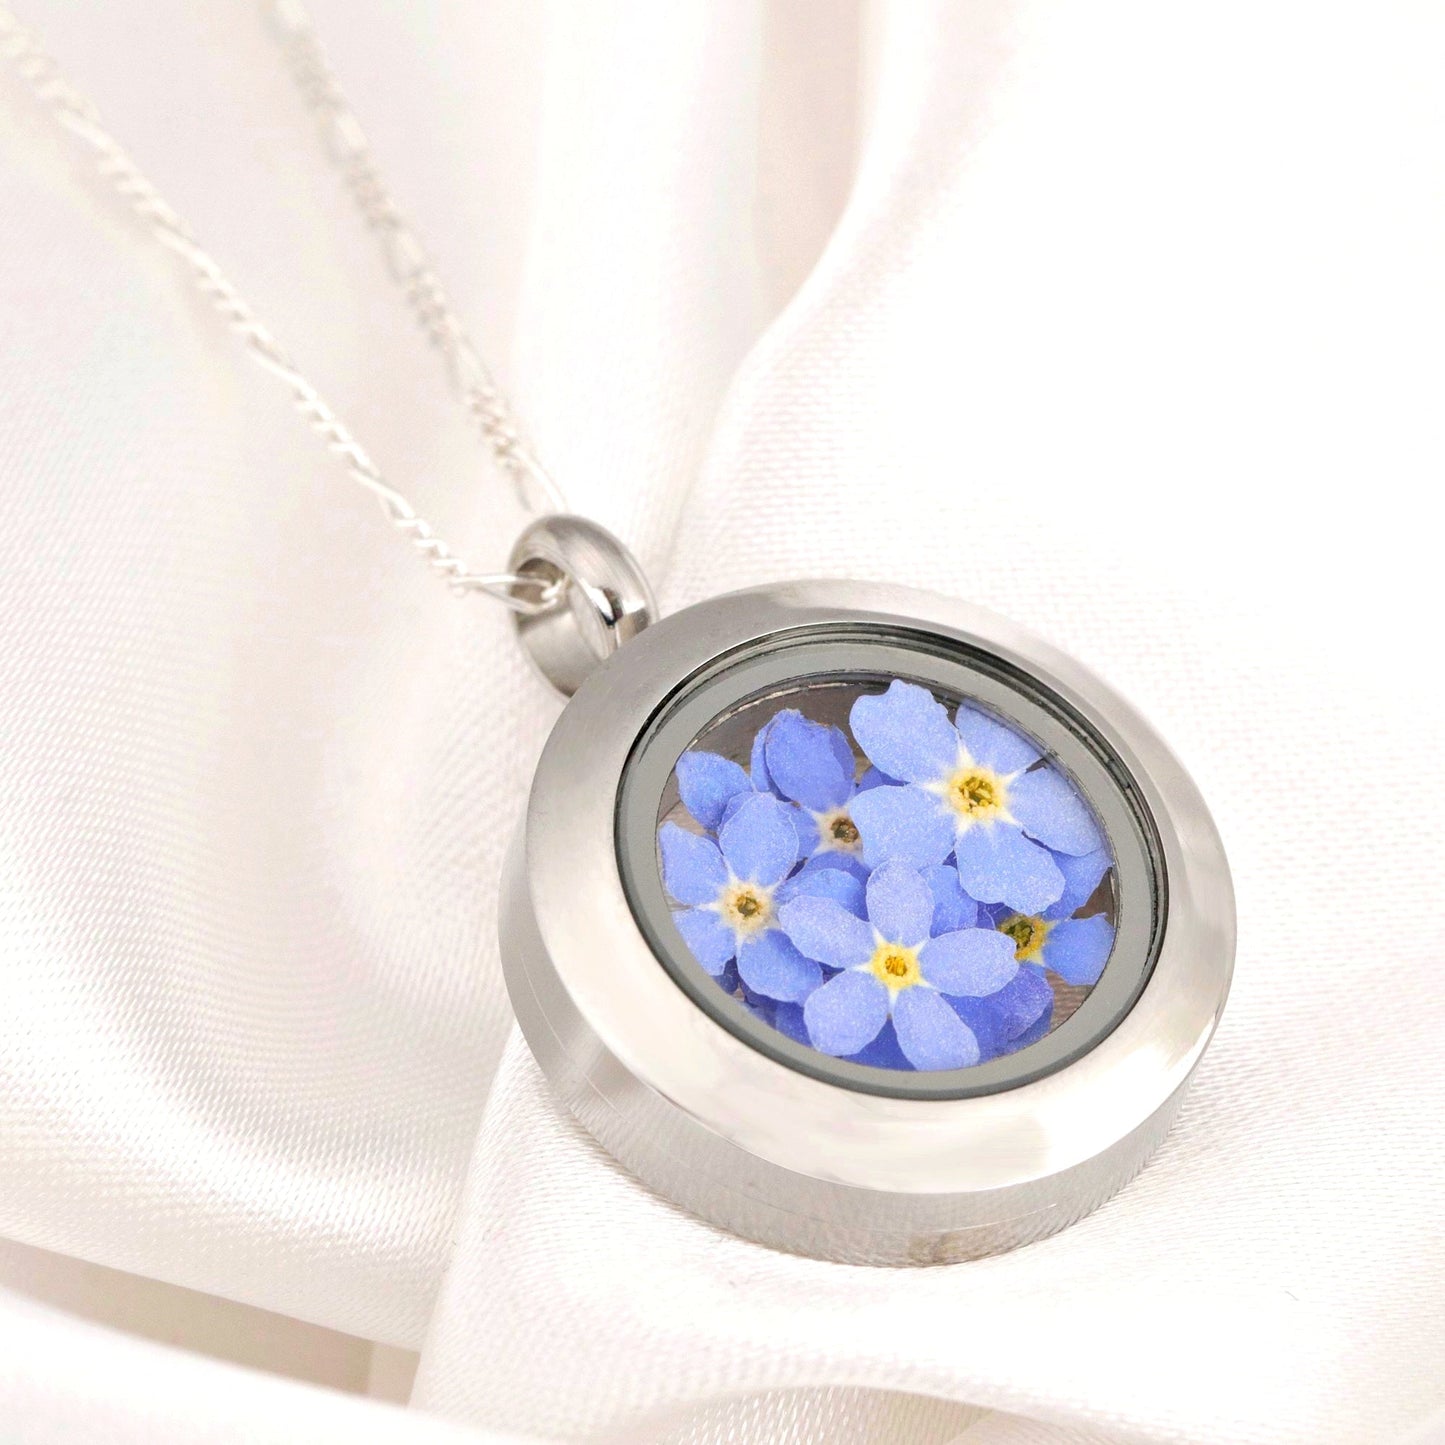 Forget-me-not flowers medallion - glass medallion with genuine flowers 925 sterling silver necklace - K925-134